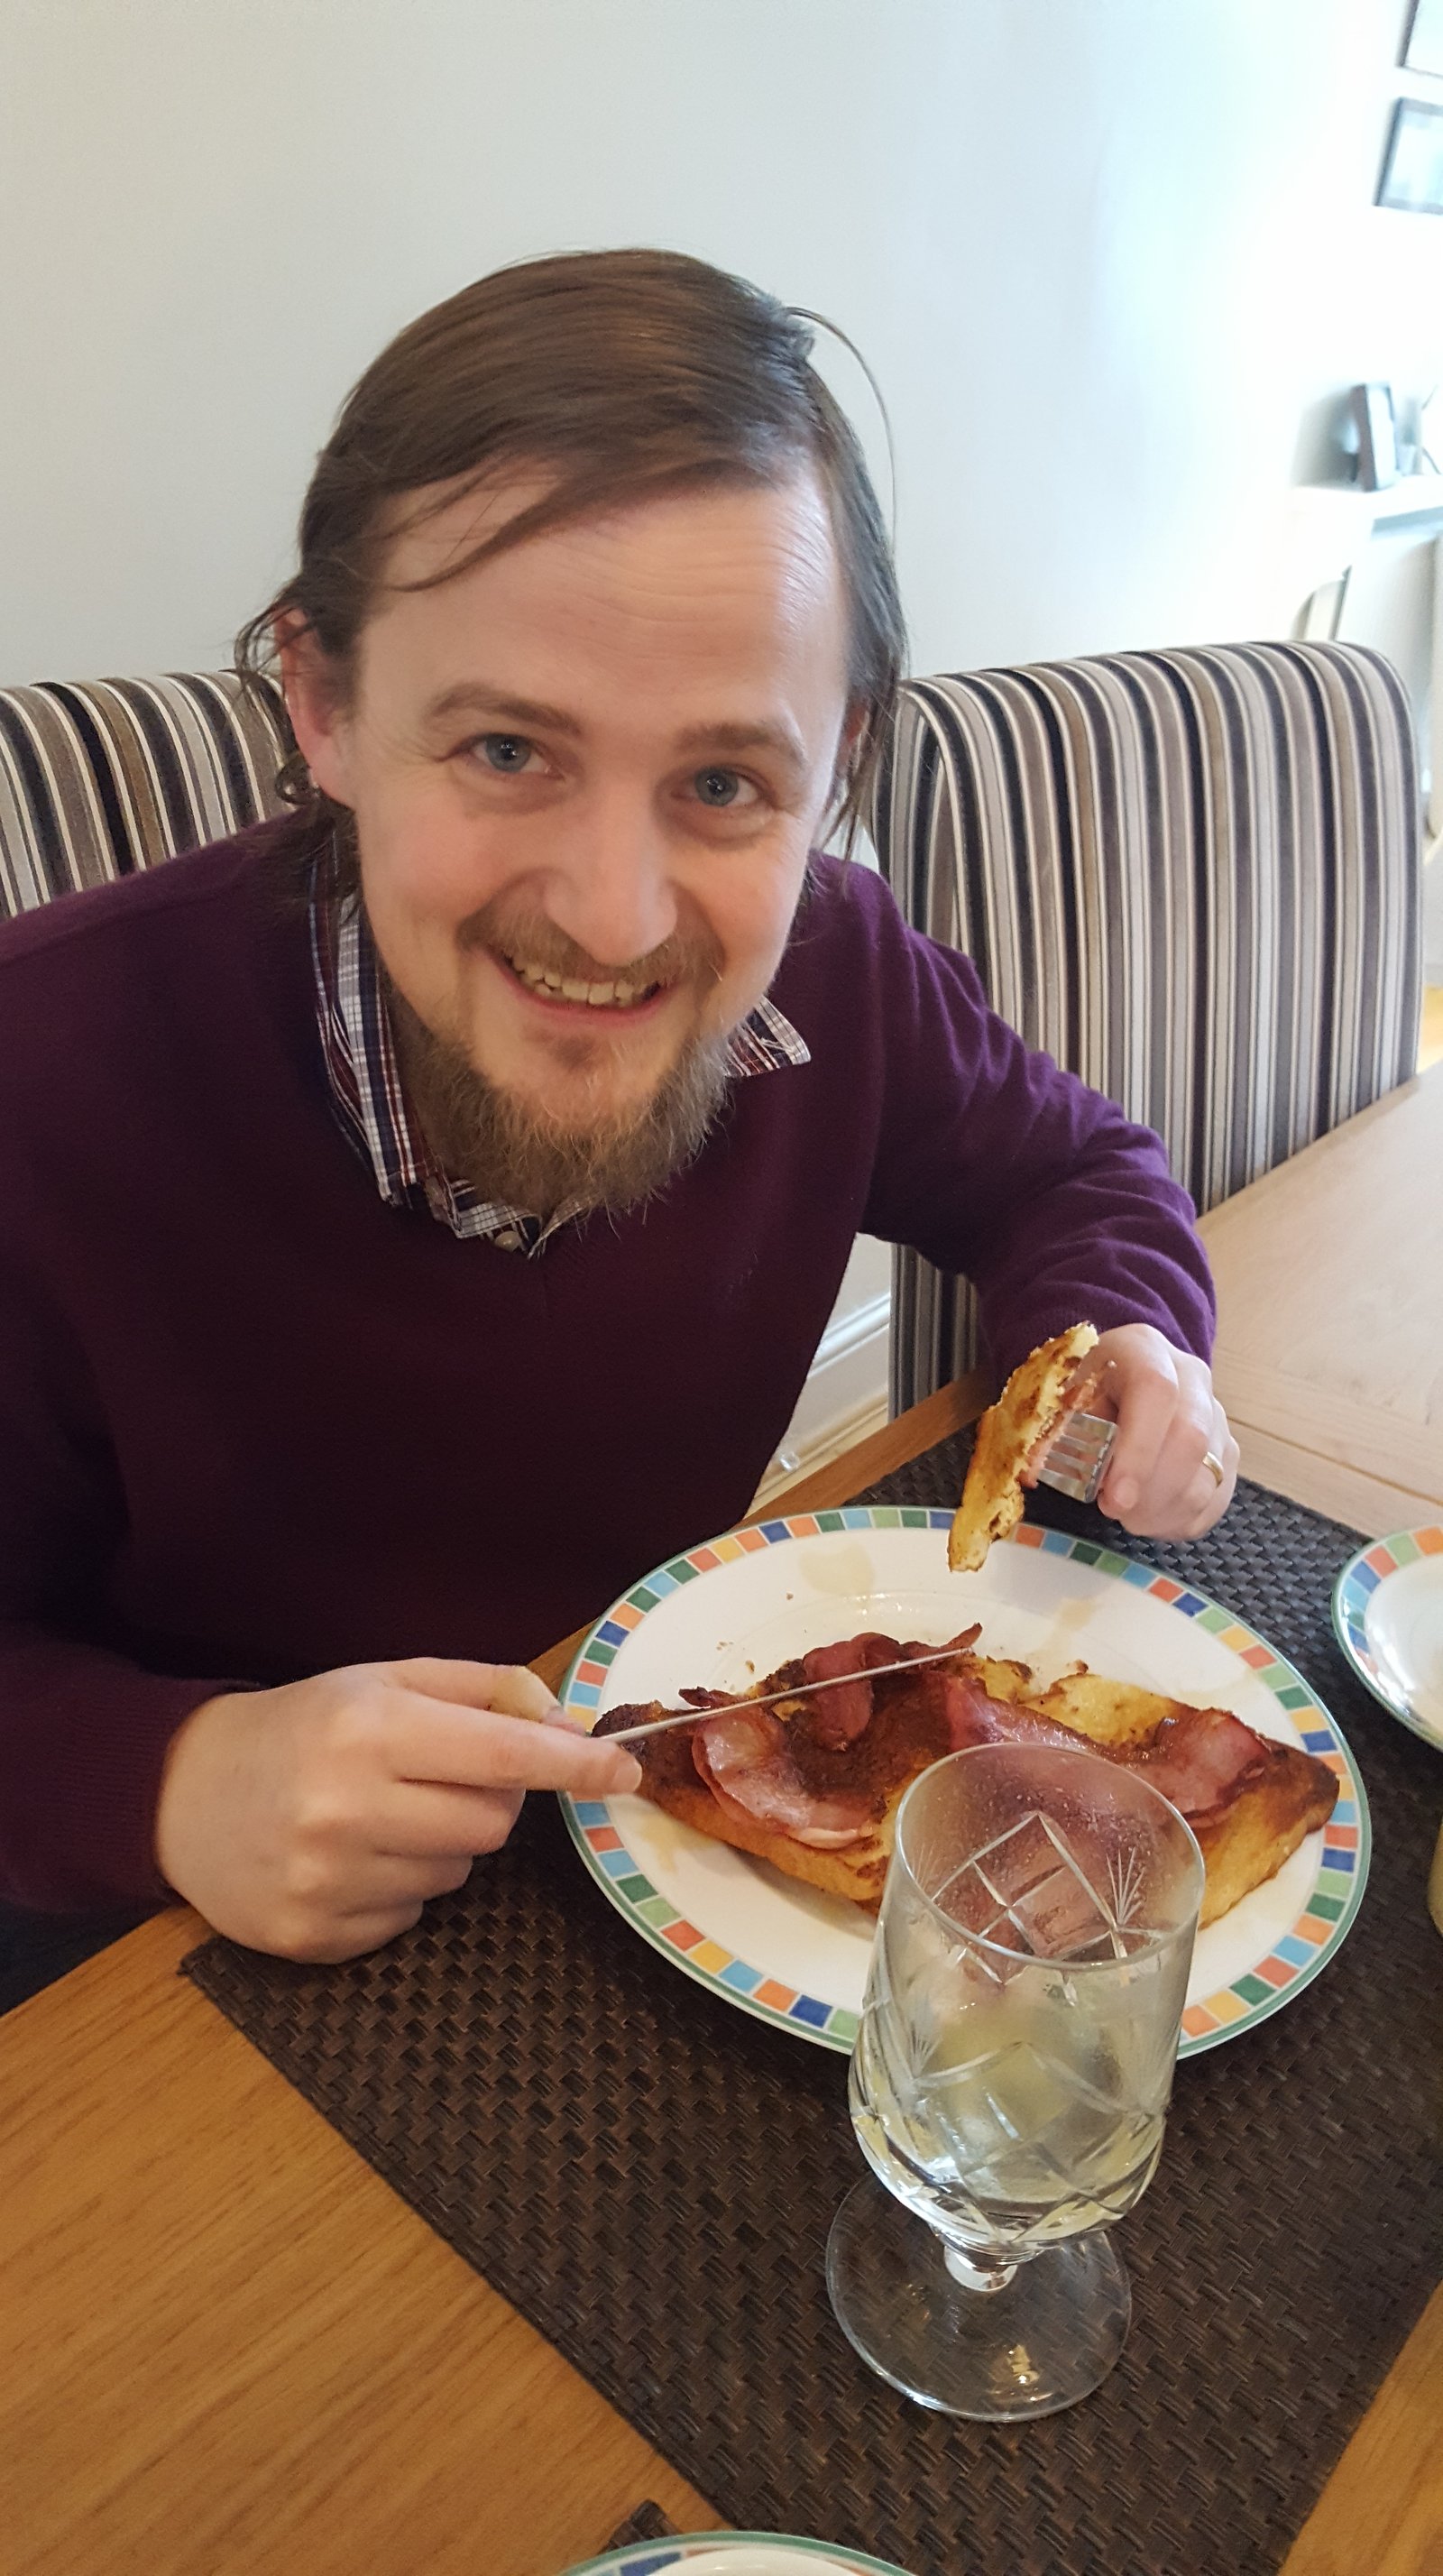 George enjoying bacon and French toast / eggy bread